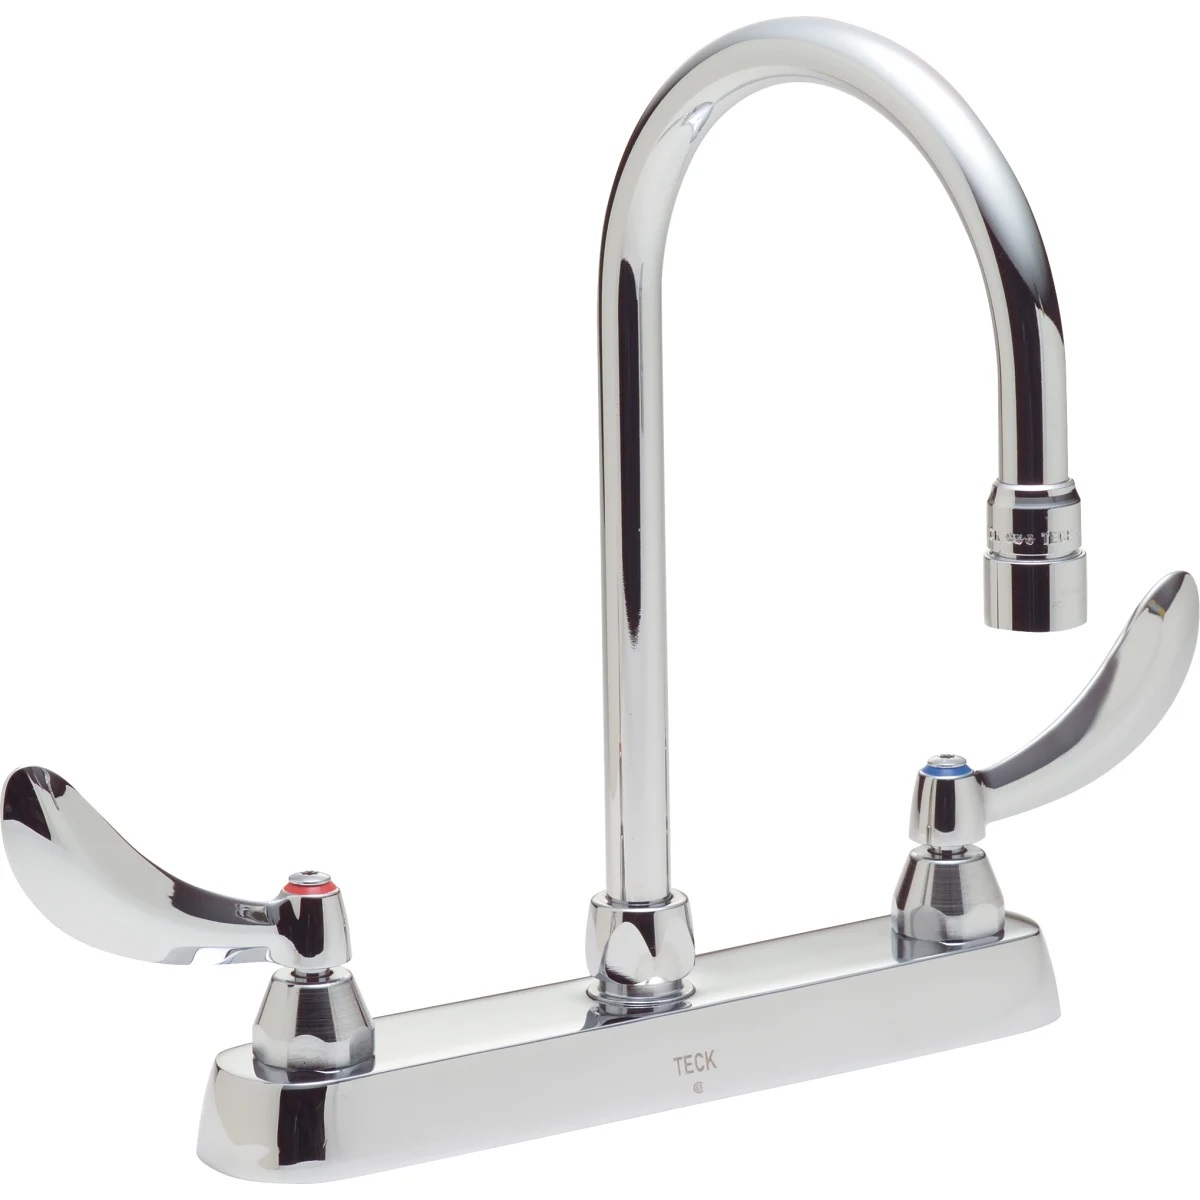 The Commercial Faucet